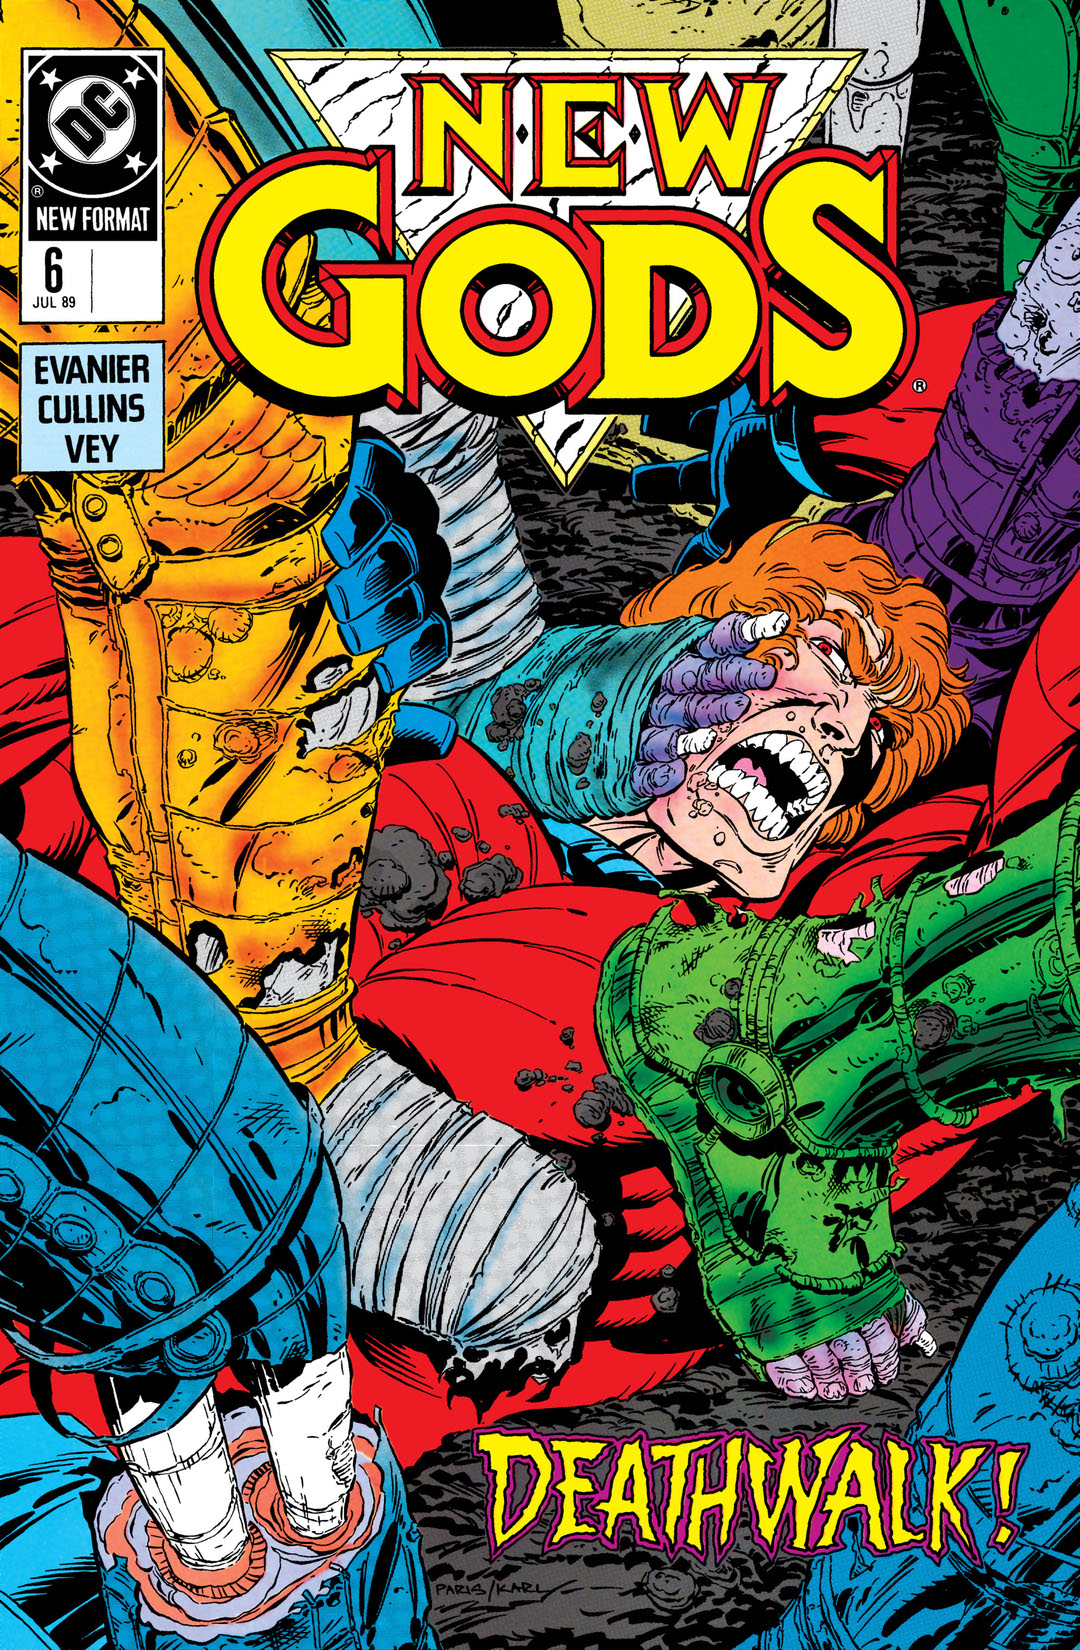 New Gods (1989-) #6 preview images